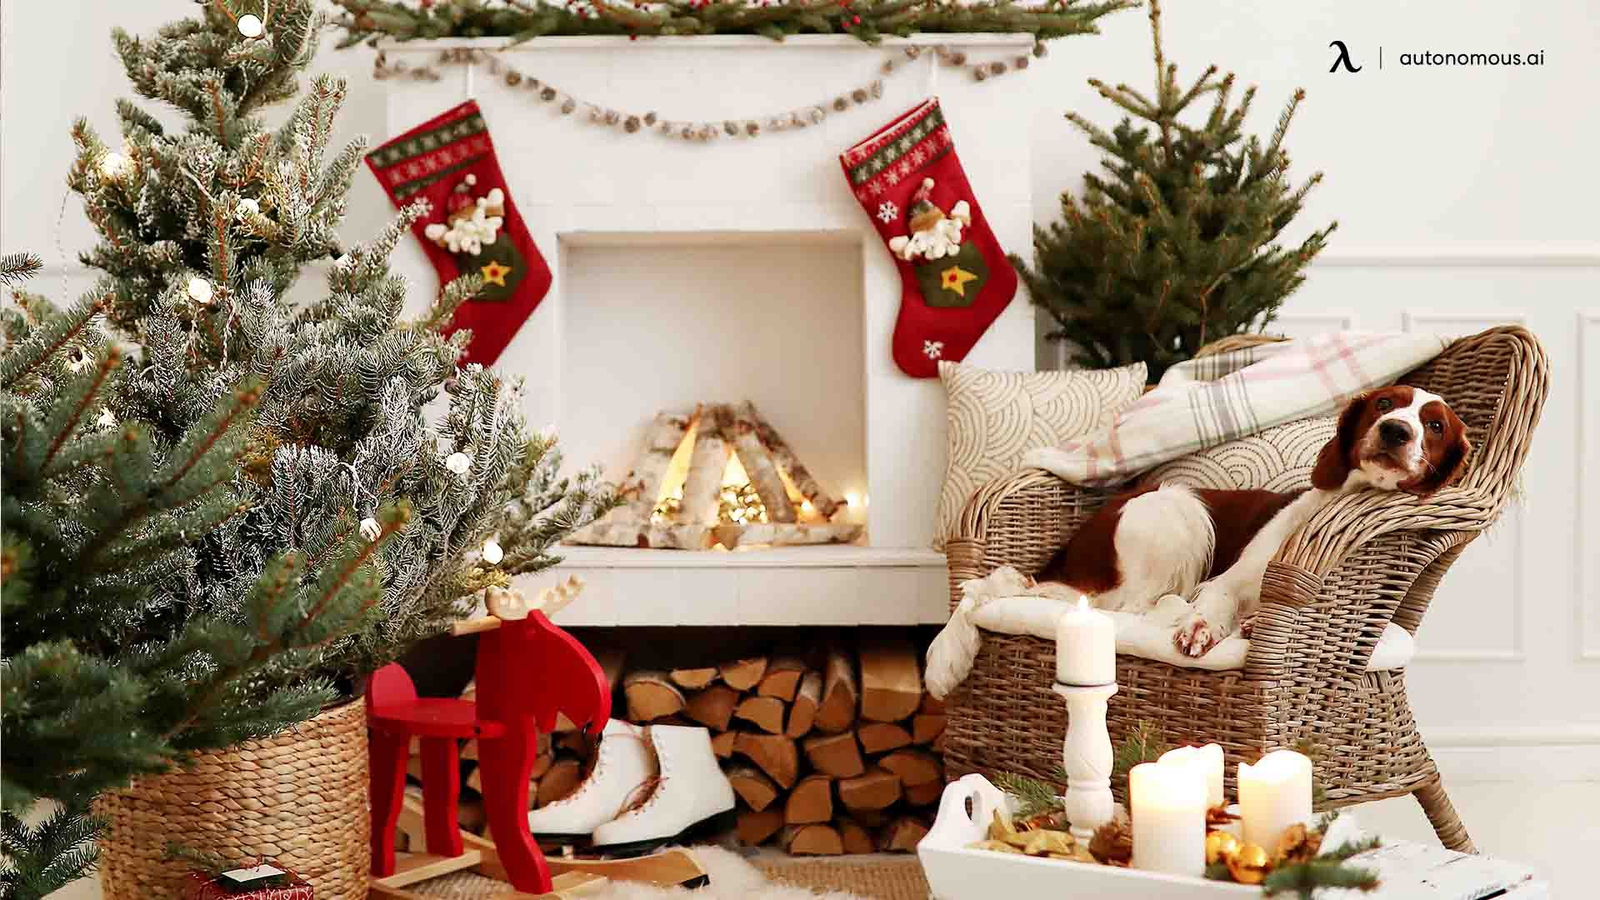 6 Best Place for a Christmas Tree Options for Your Home